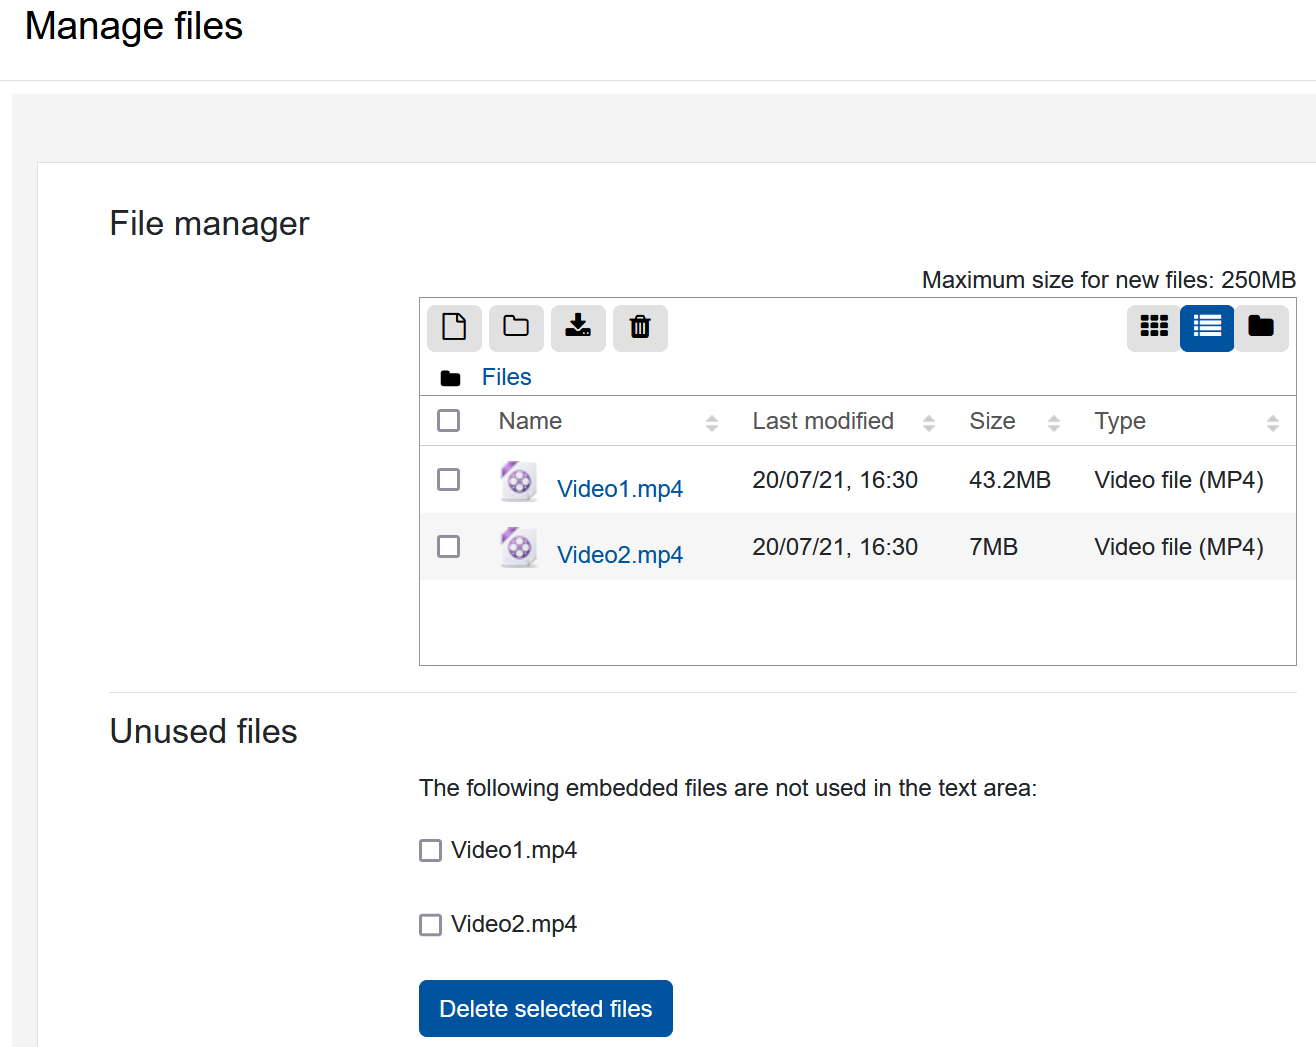 Screenshot "Manage files" with display of files